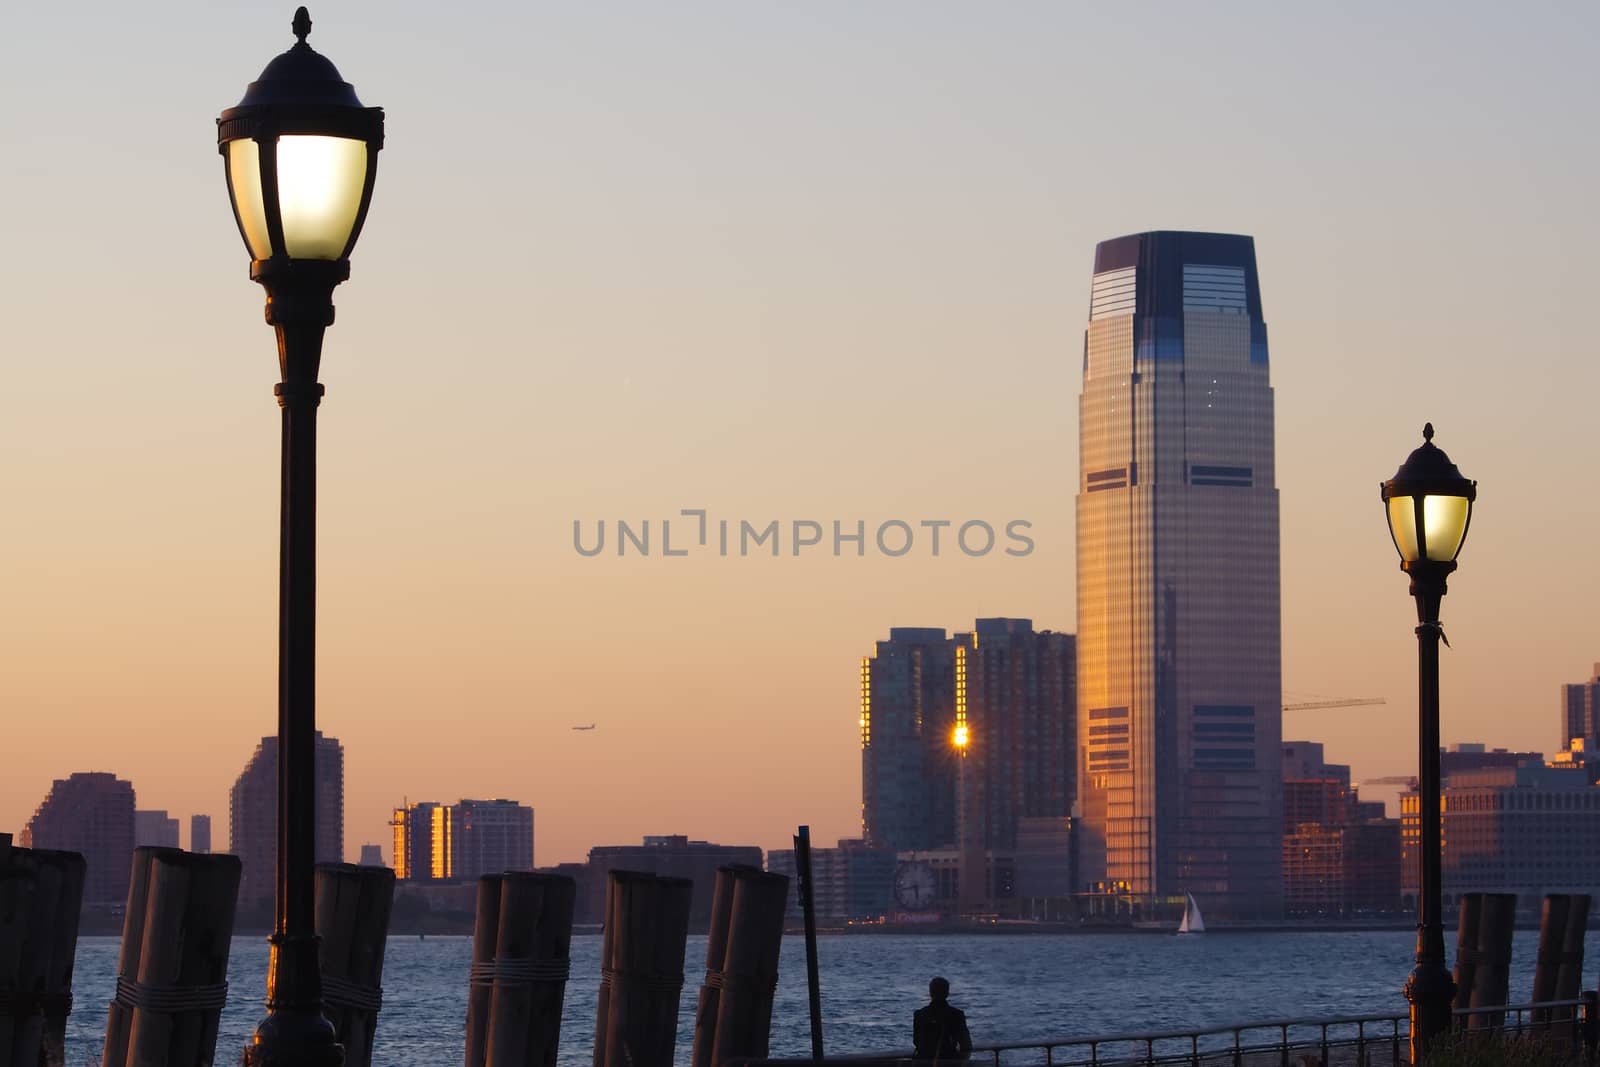 South of Manhattan at sunset by totony